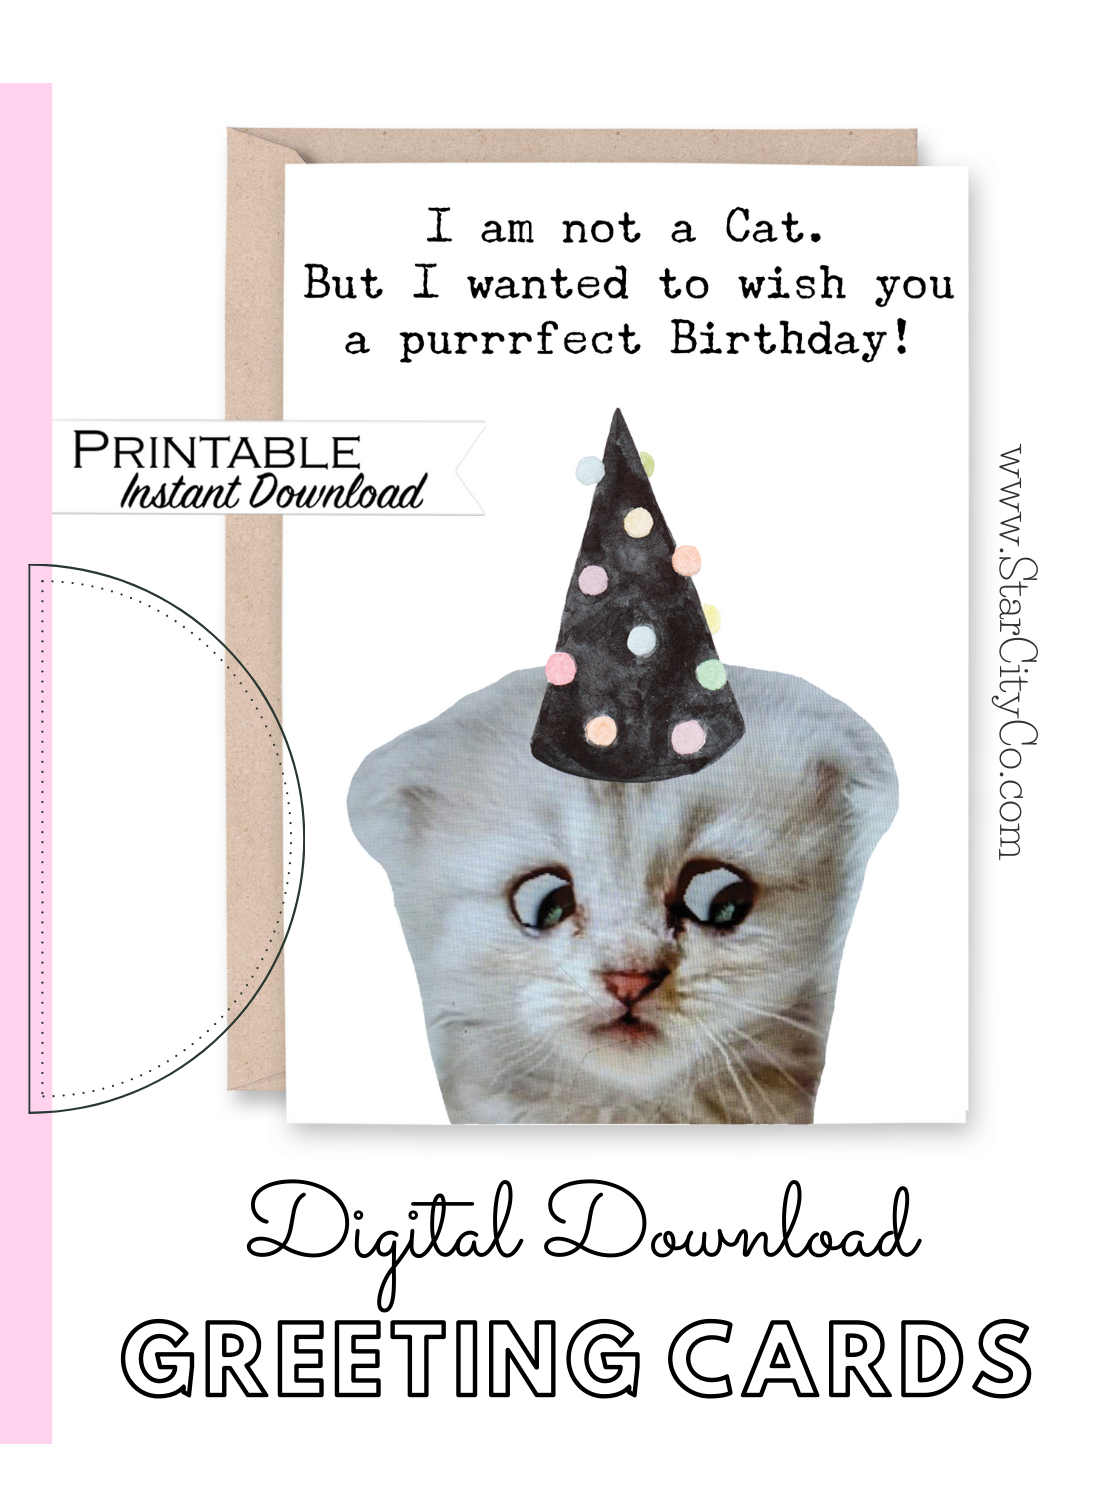 I am Not a Cat - Funny Cat Birthday Card Printable - Digital Download